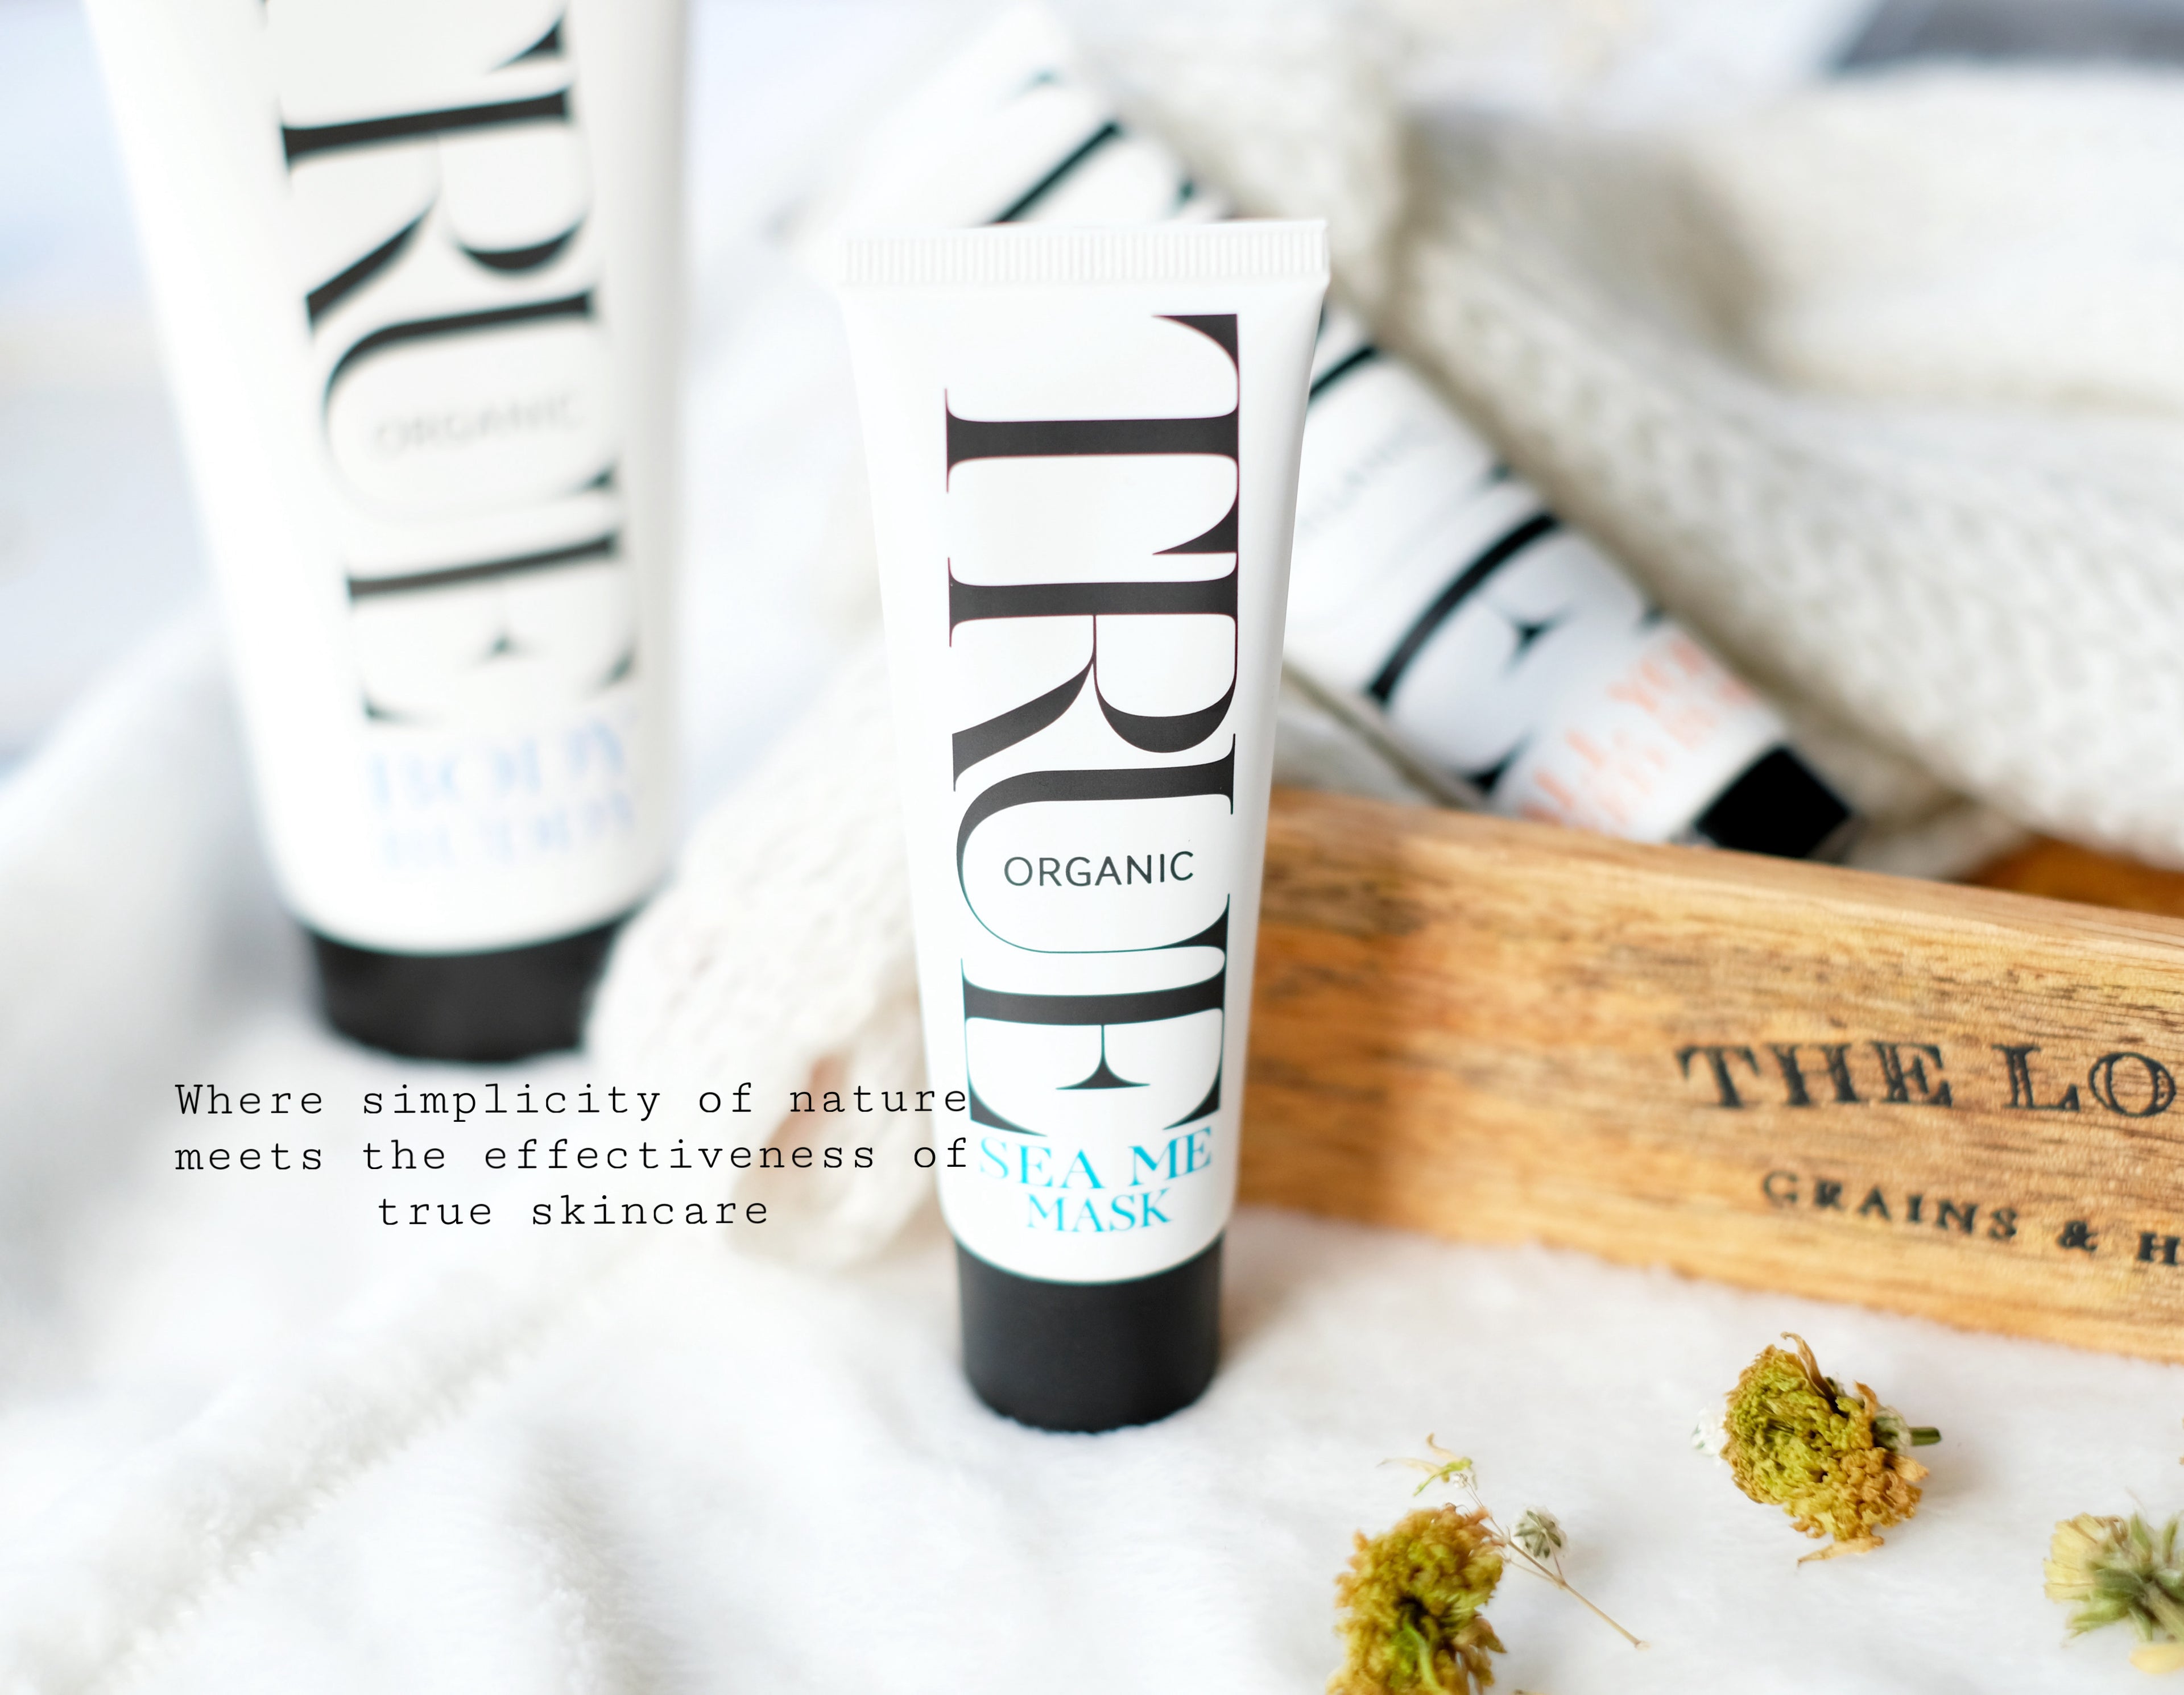 True organic of Sweden Best organic skincare products 